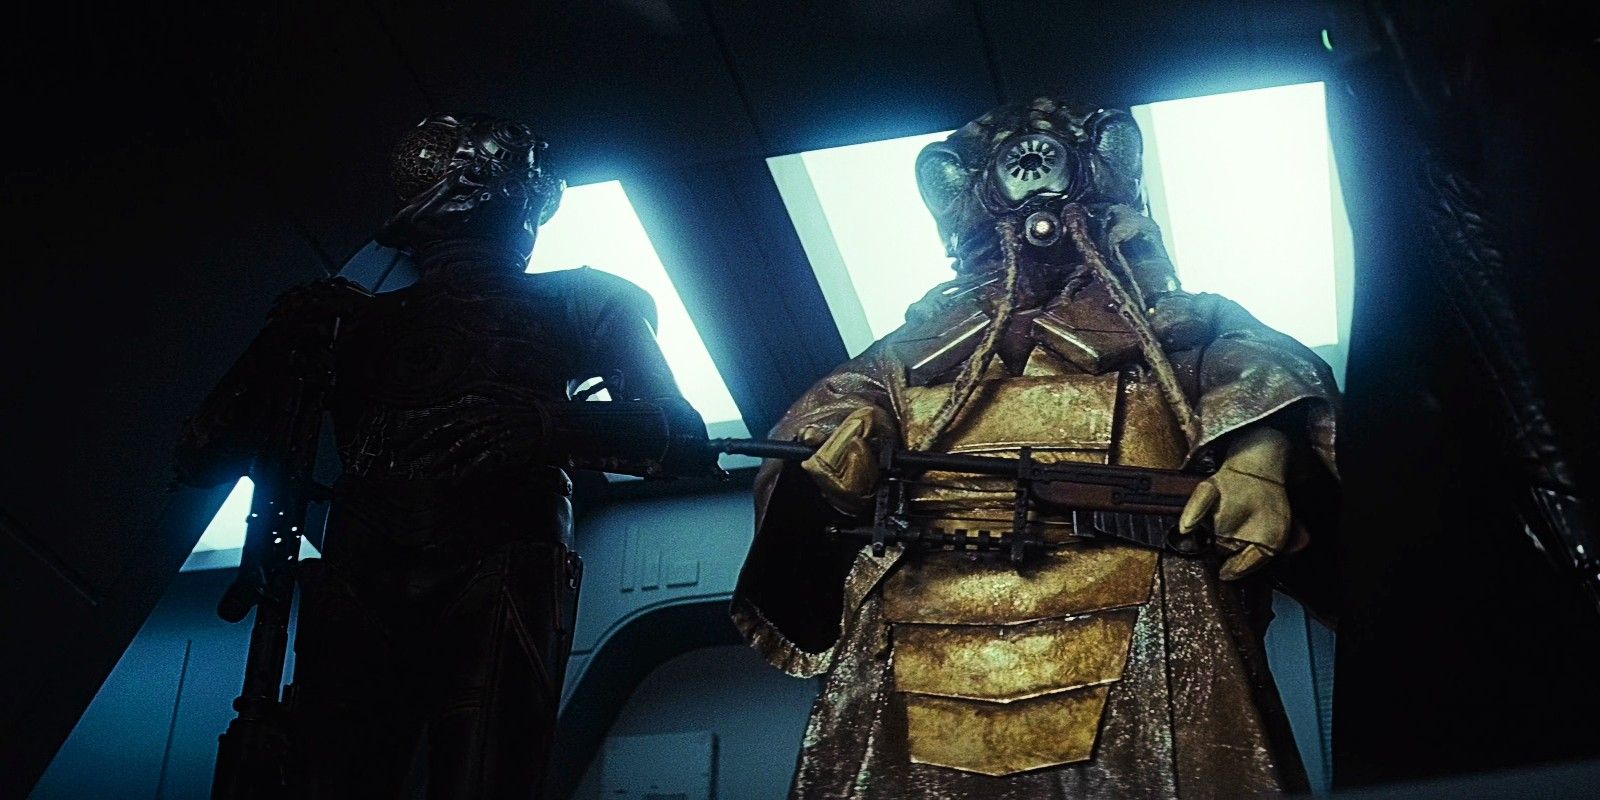 4 LOM and Zuckuss in The Empire Strikes Back